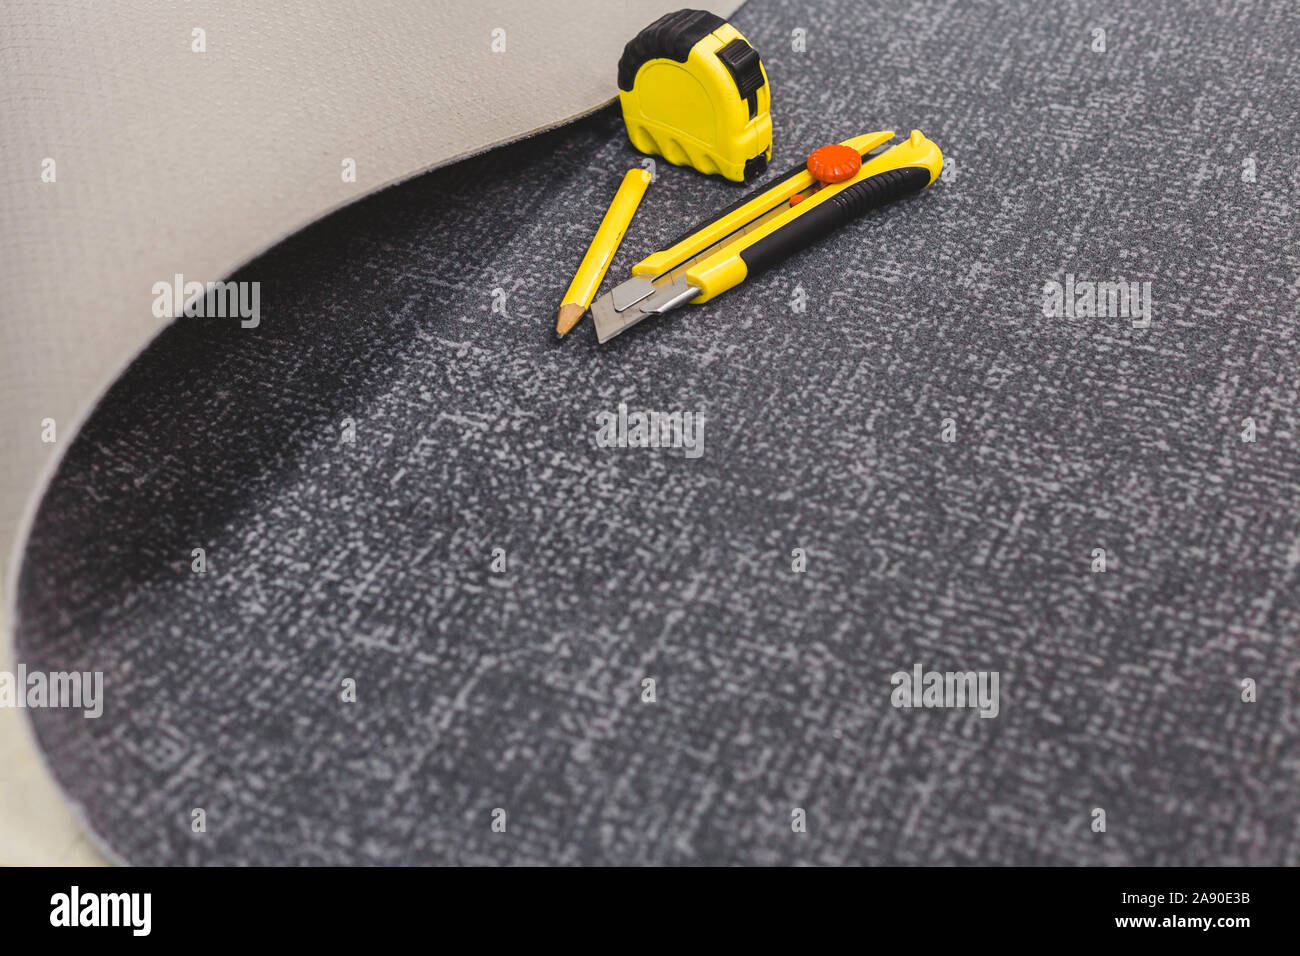 Workplace when laying carpet - finishing work floor covering - copy space Stock Photo